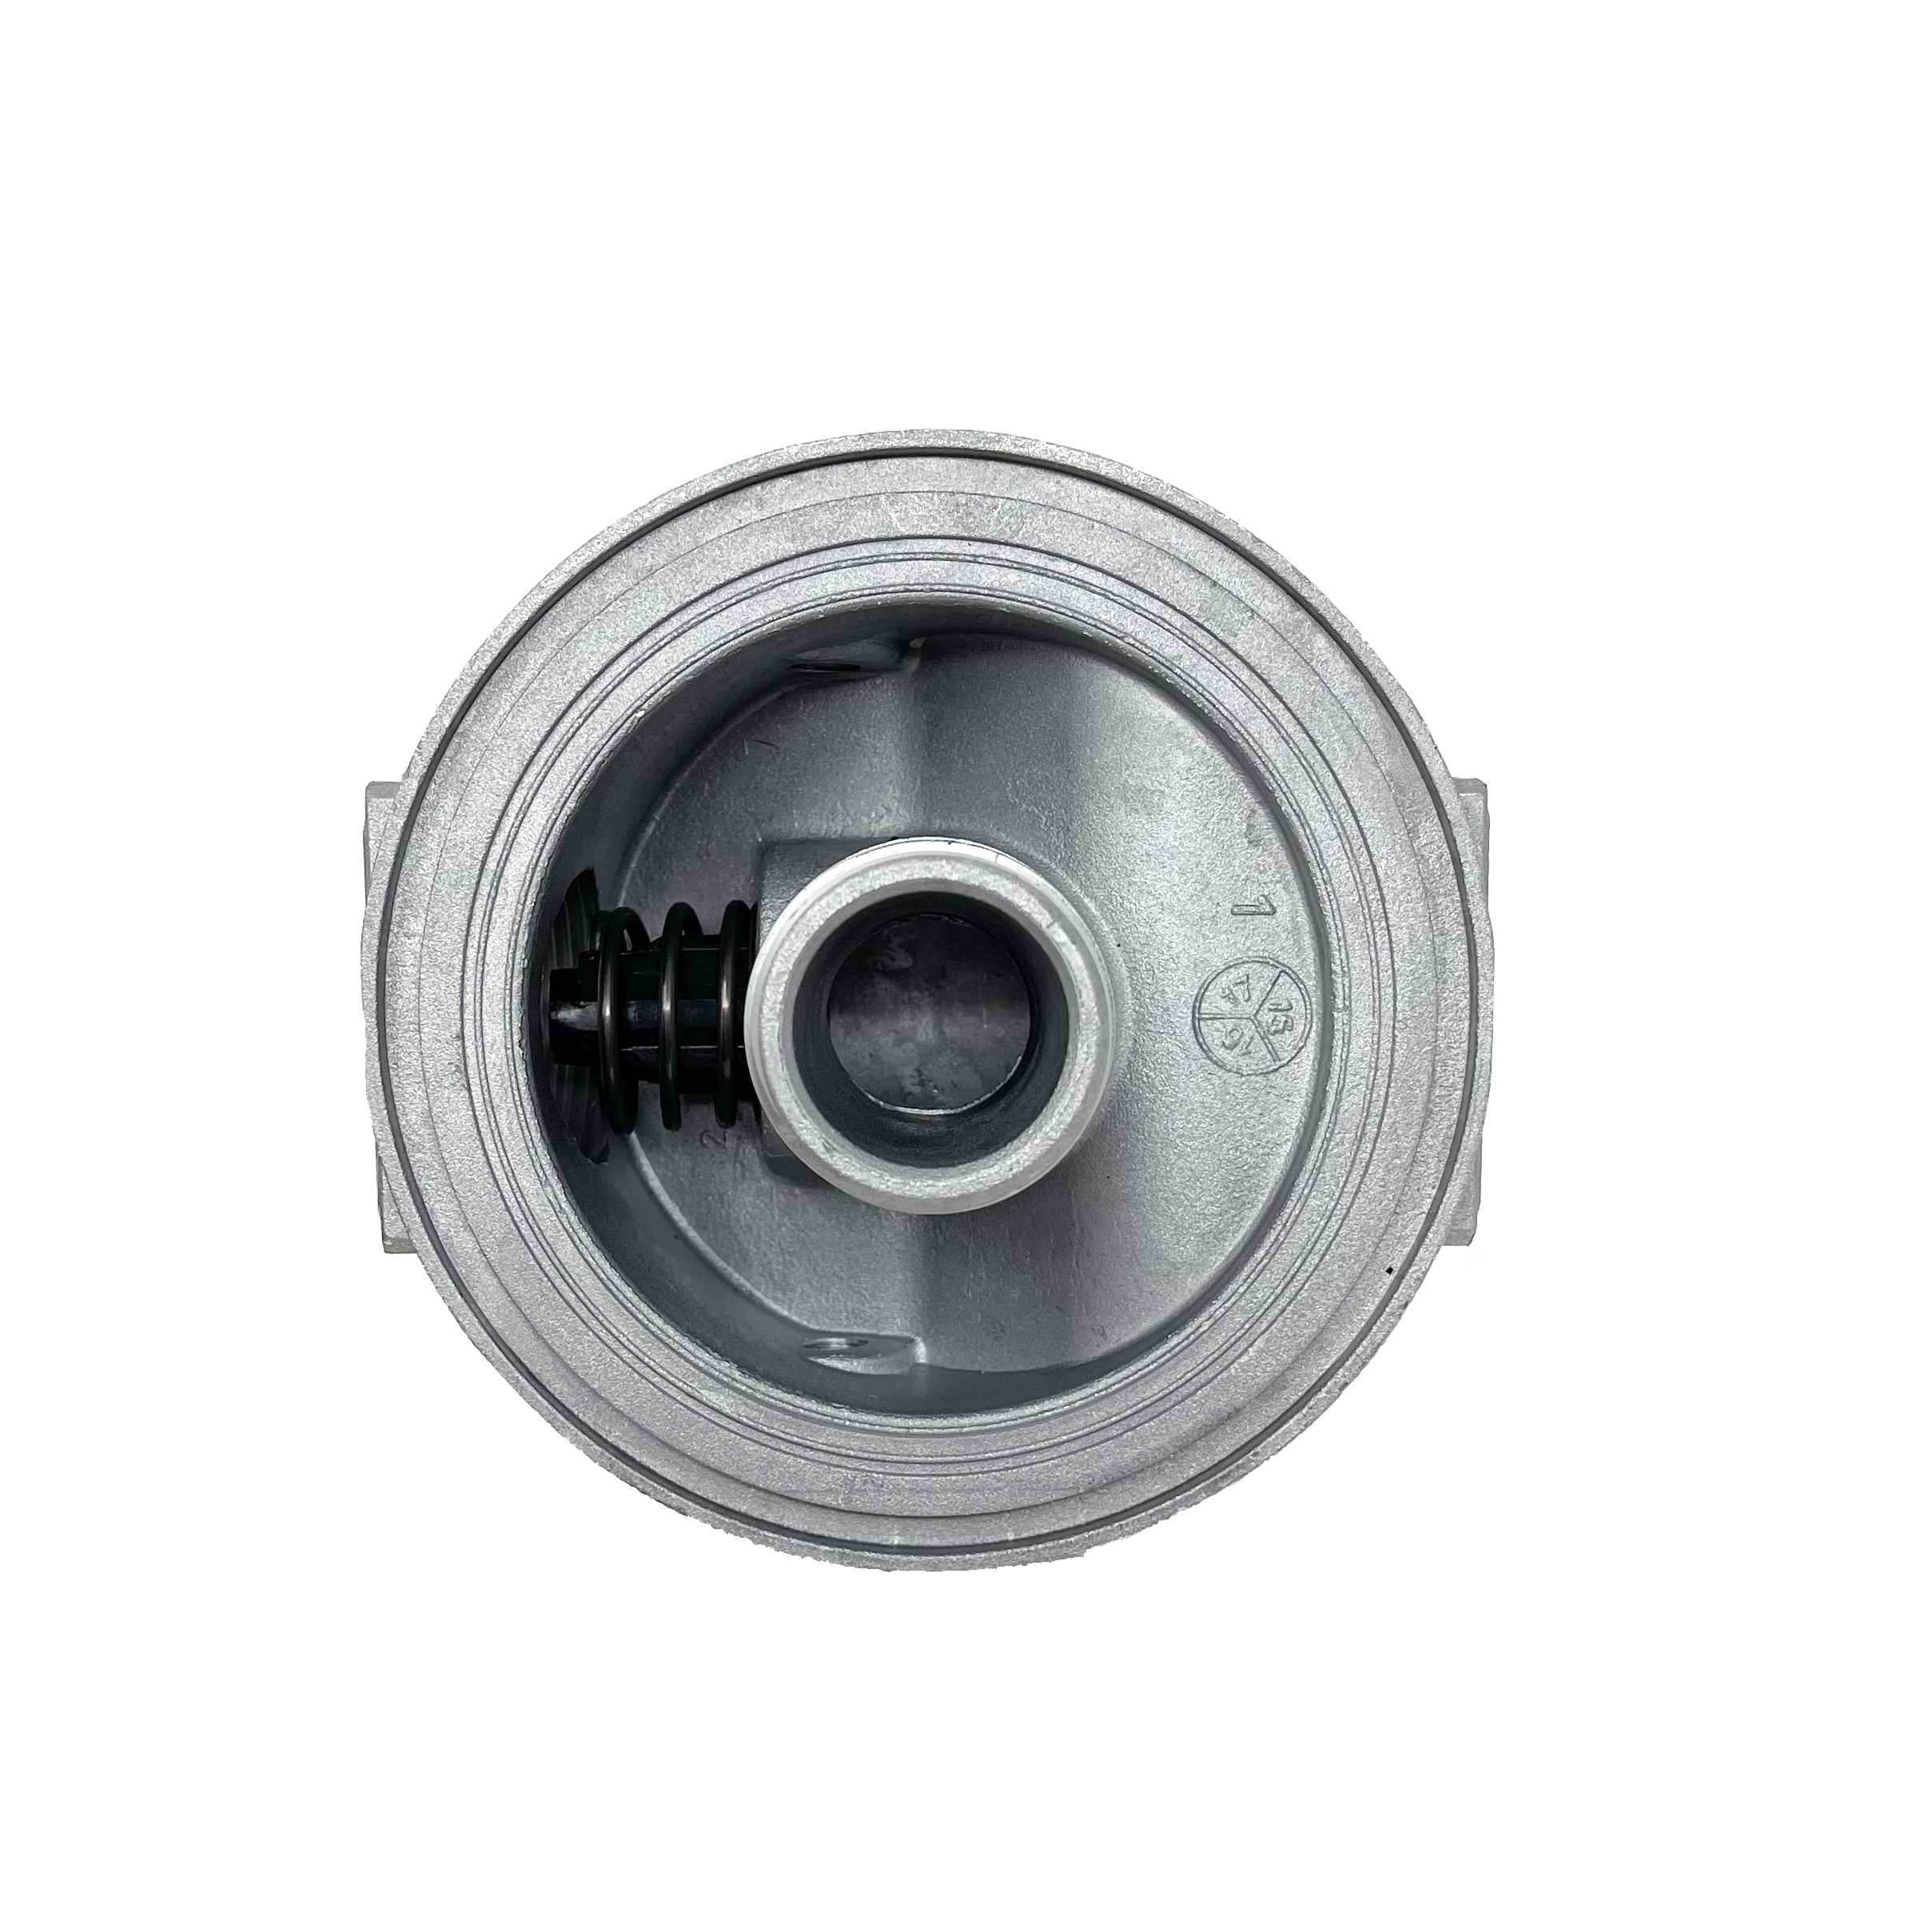 SSF-120-B1.7-1 : Stauff SSF Spin-On Filter Head, 60 GPM, 174psi, 1.25" NPT, with Bypass, Clogging indicator port drilled for Return